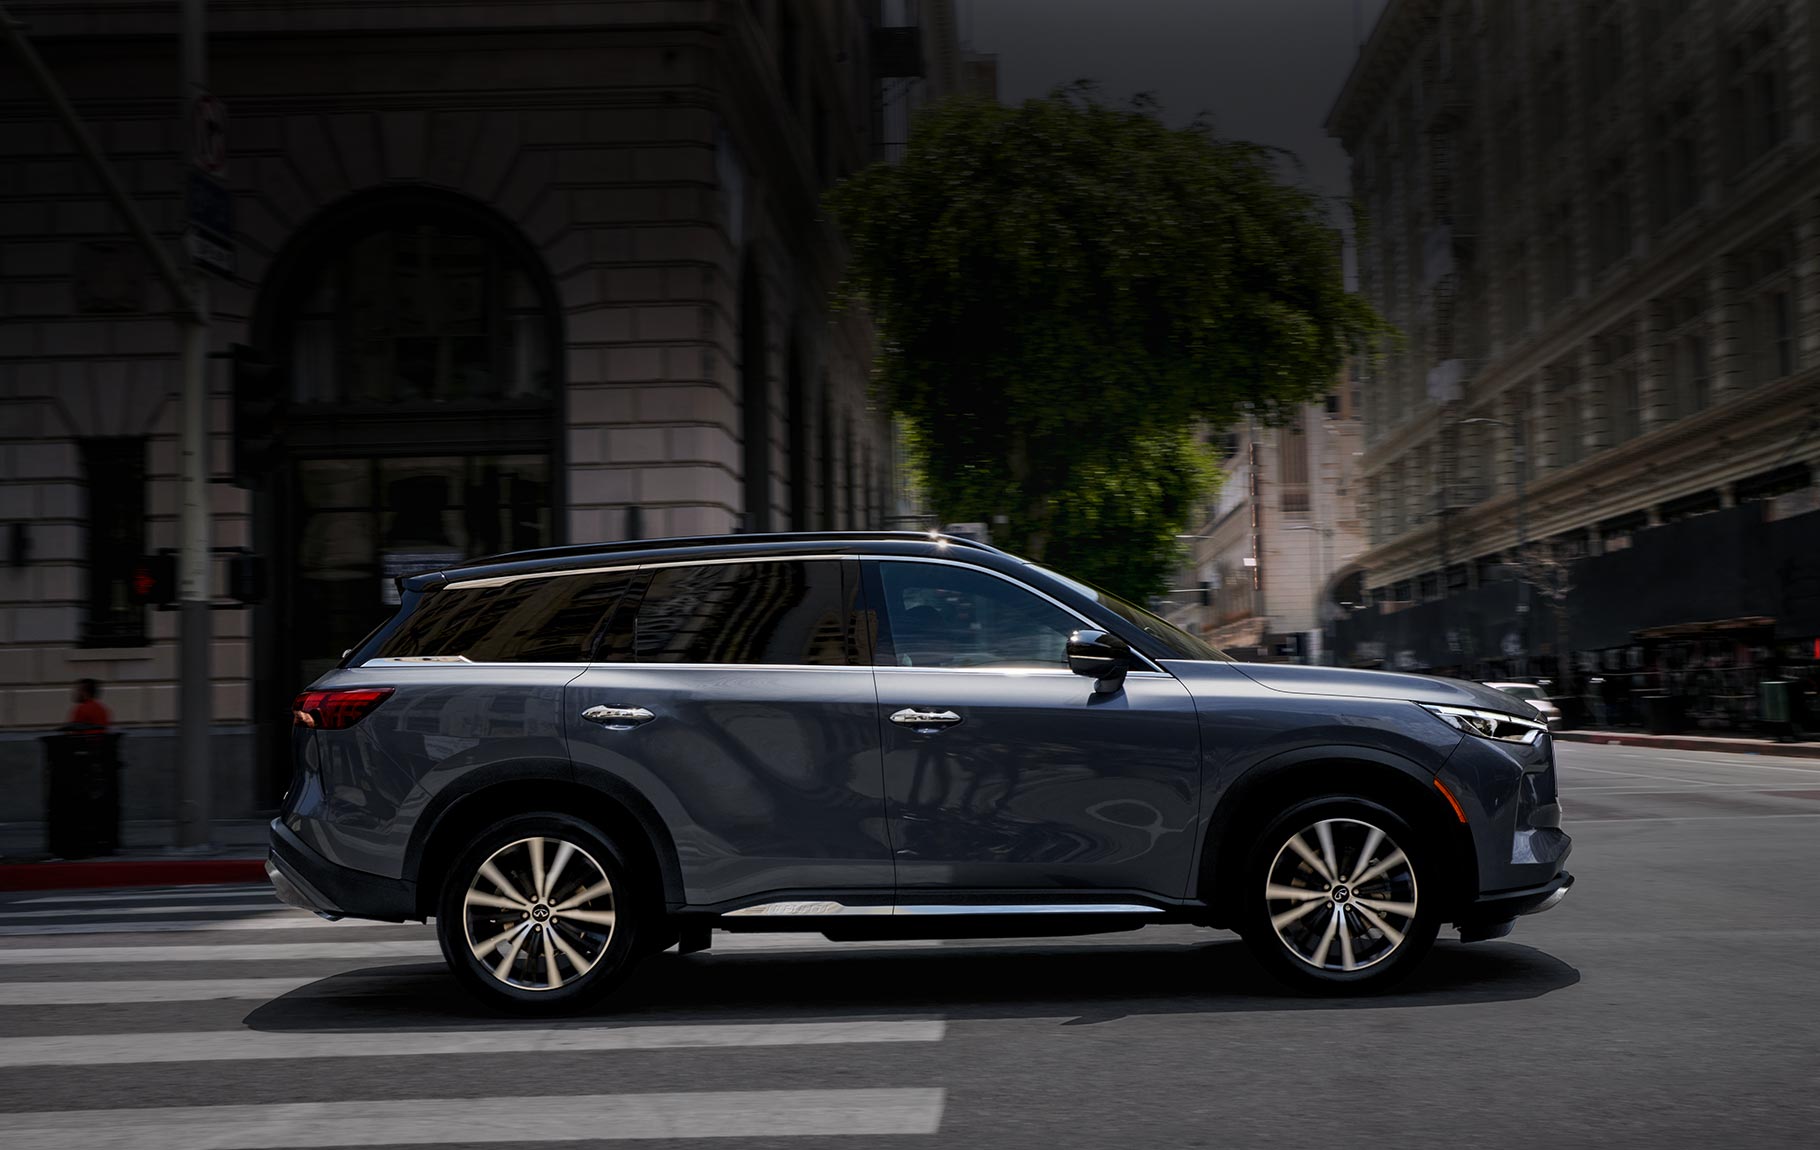 Find the perfect INFINITI QX55 with Sanford INFINITI. With our wide selection of new and used INFINITI cars, it's easy to find your dream car at a great price.